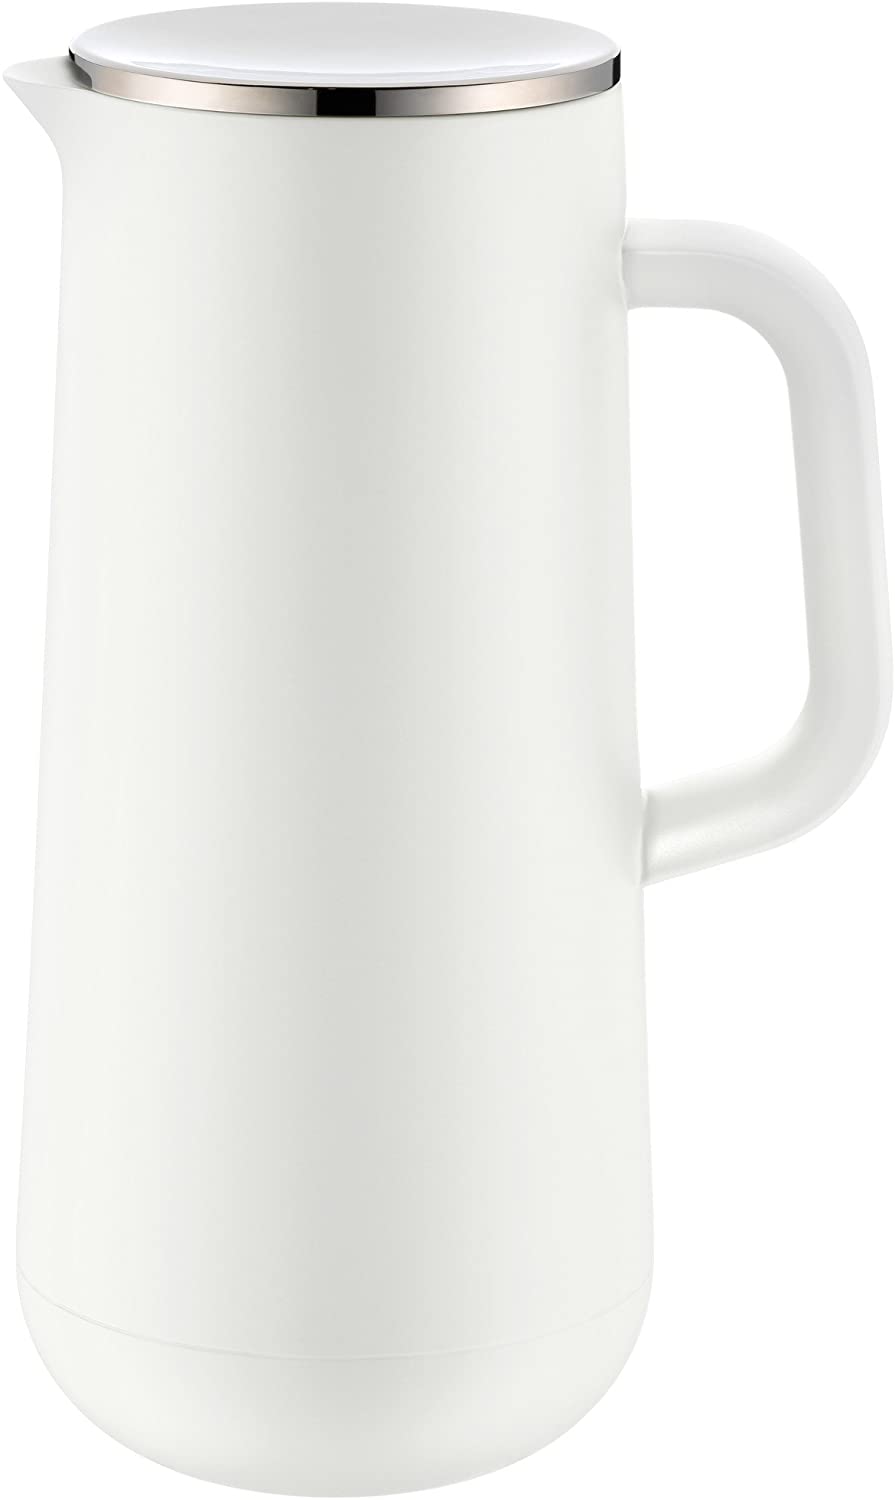 WMF Impulse Insulated Thermos Jug, 1.0 l, for Coffee or Tea, Screw Cap, Keeps Drinks Warm or Cold for 24 Hours, White